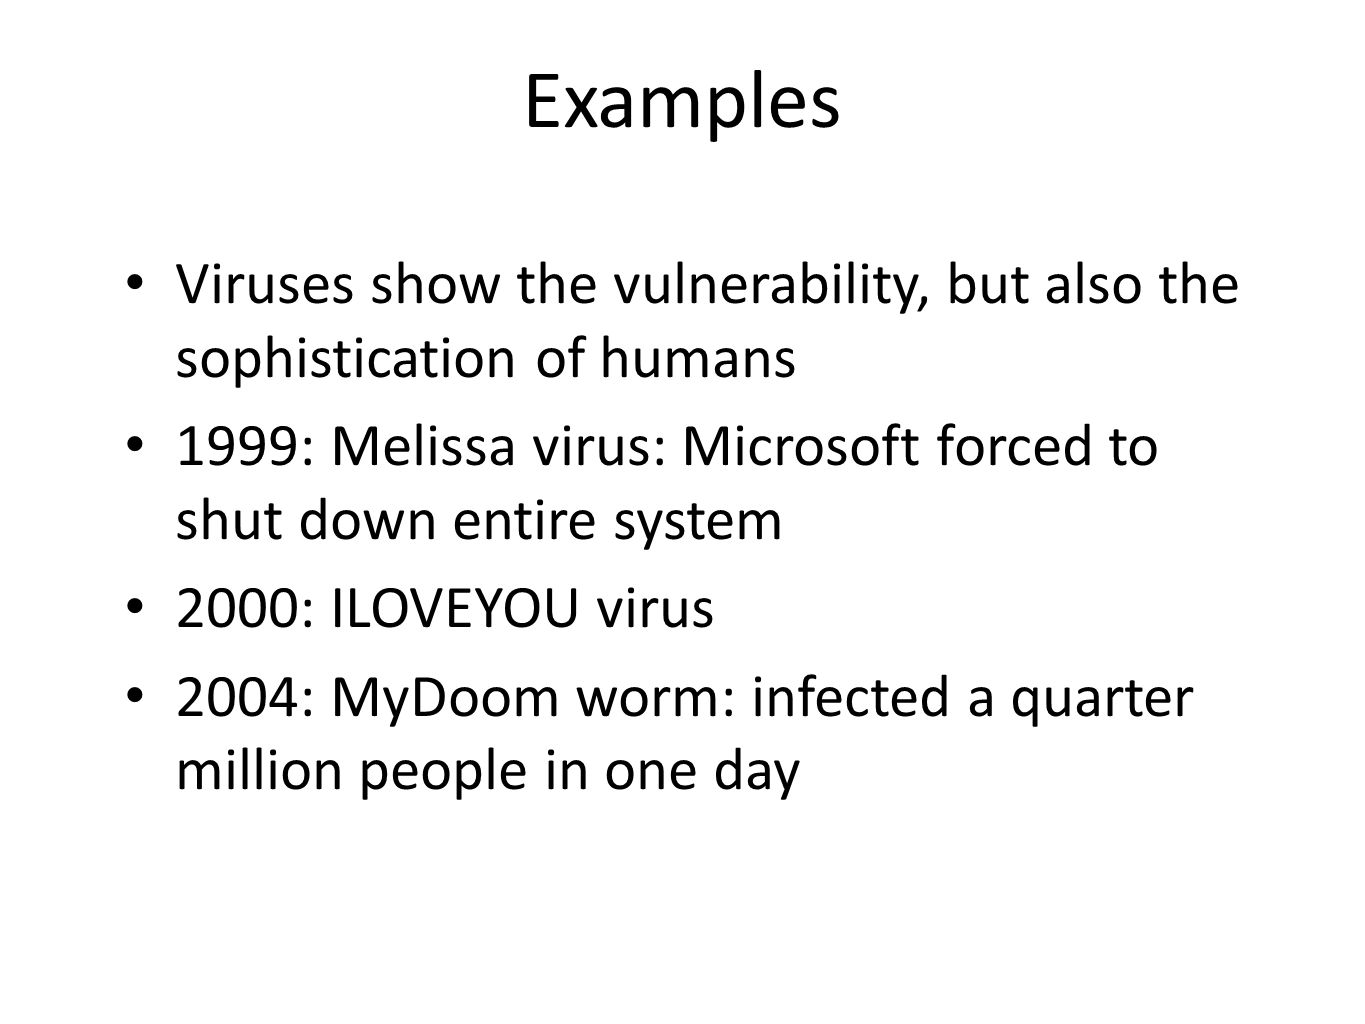 Examples Viruses show the vulnerability, but also the sophistication of humans 1999: Melissa virus: Microsoft forced to shut down entire system 2000: ILOVEYOU virus 2004: MyDoom worm: infected a quarter million people in one day